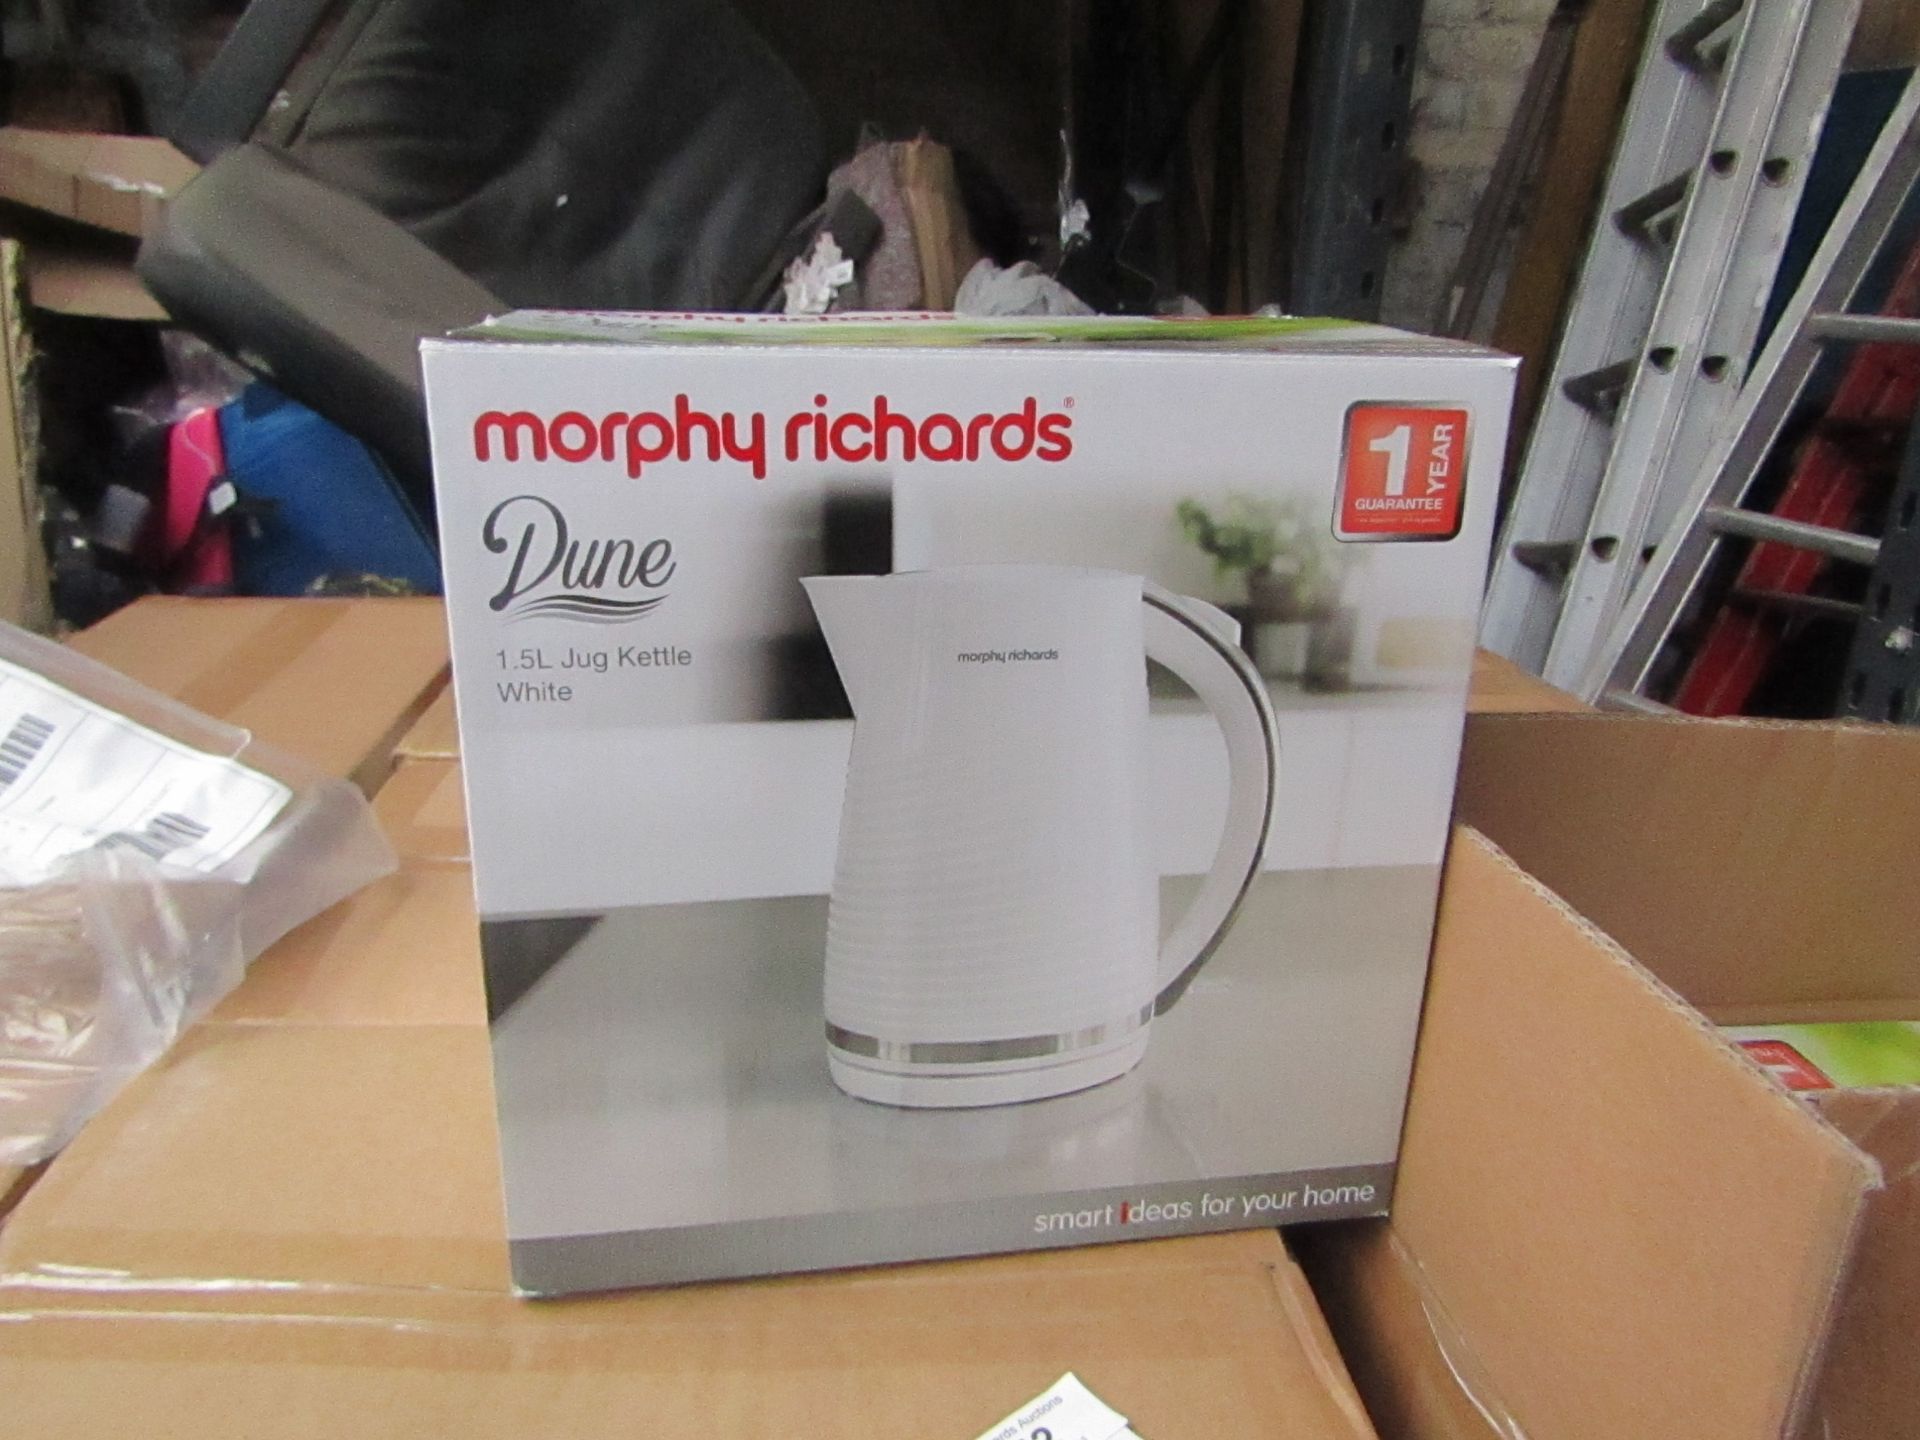 Morphy Richards Dune 1.7L white kettle, brand new and boxed. RRP £32.99